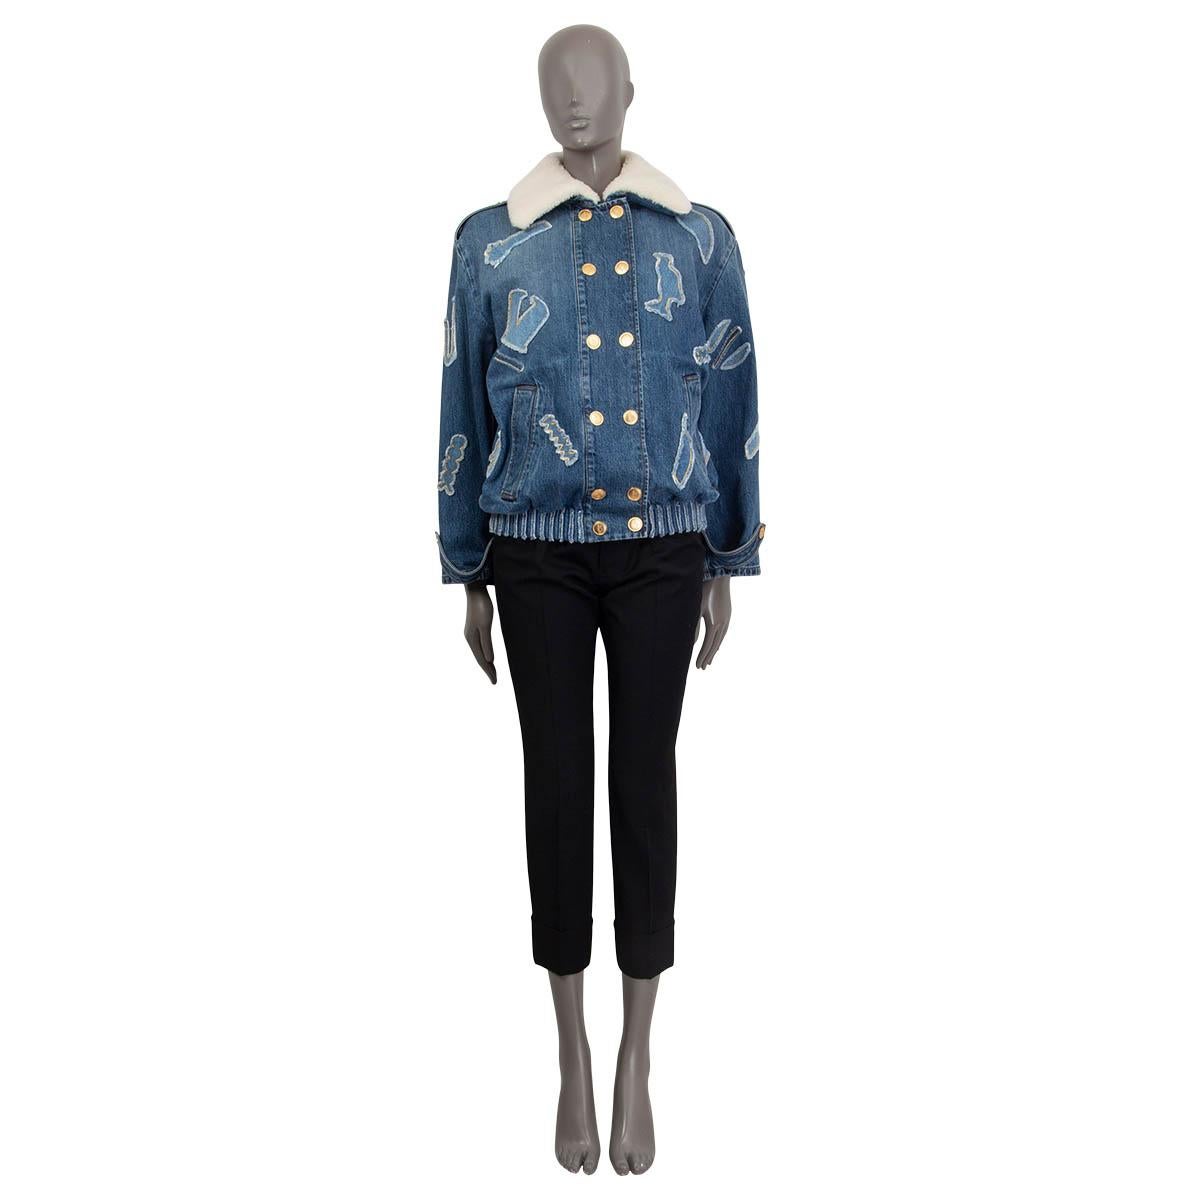 100% authentic Chanel Metier's d'Art 2018/19 denim bomber jacket in washed blue cotton (100%). Features a shearling collar, epaulettes at the cuffs and two side slit pockets on the front. Has epaulettes at the shoulders and patches with a golden and